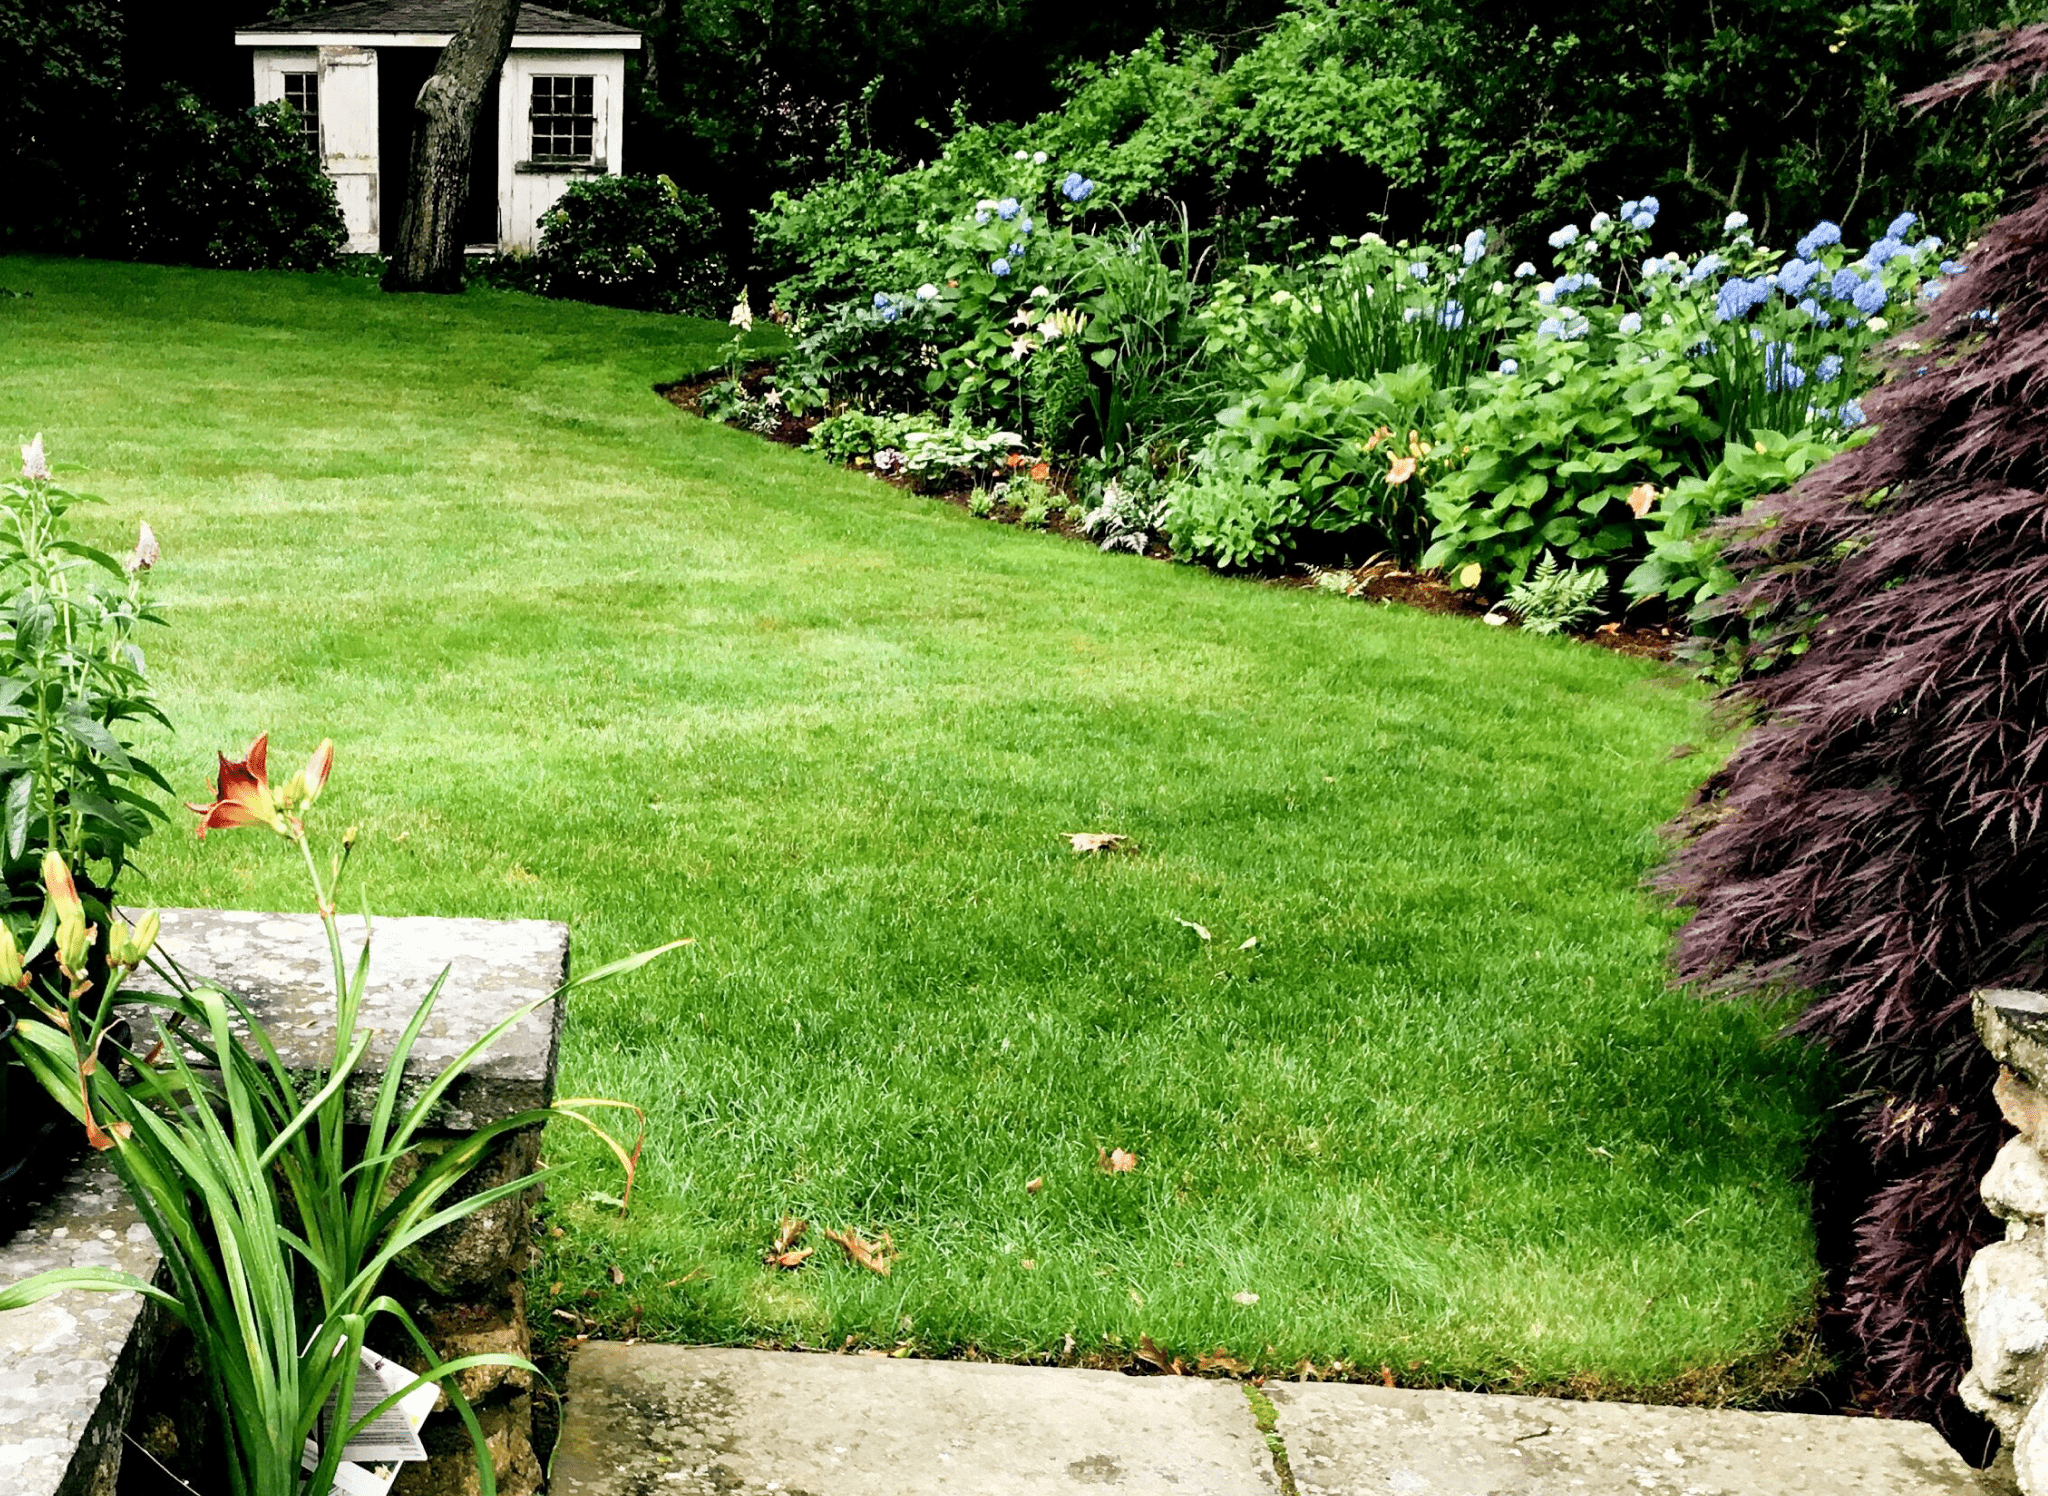 2022 Landscaping Cost Avg, How Much Does It Cost To Have Someone Landscape Your Yard